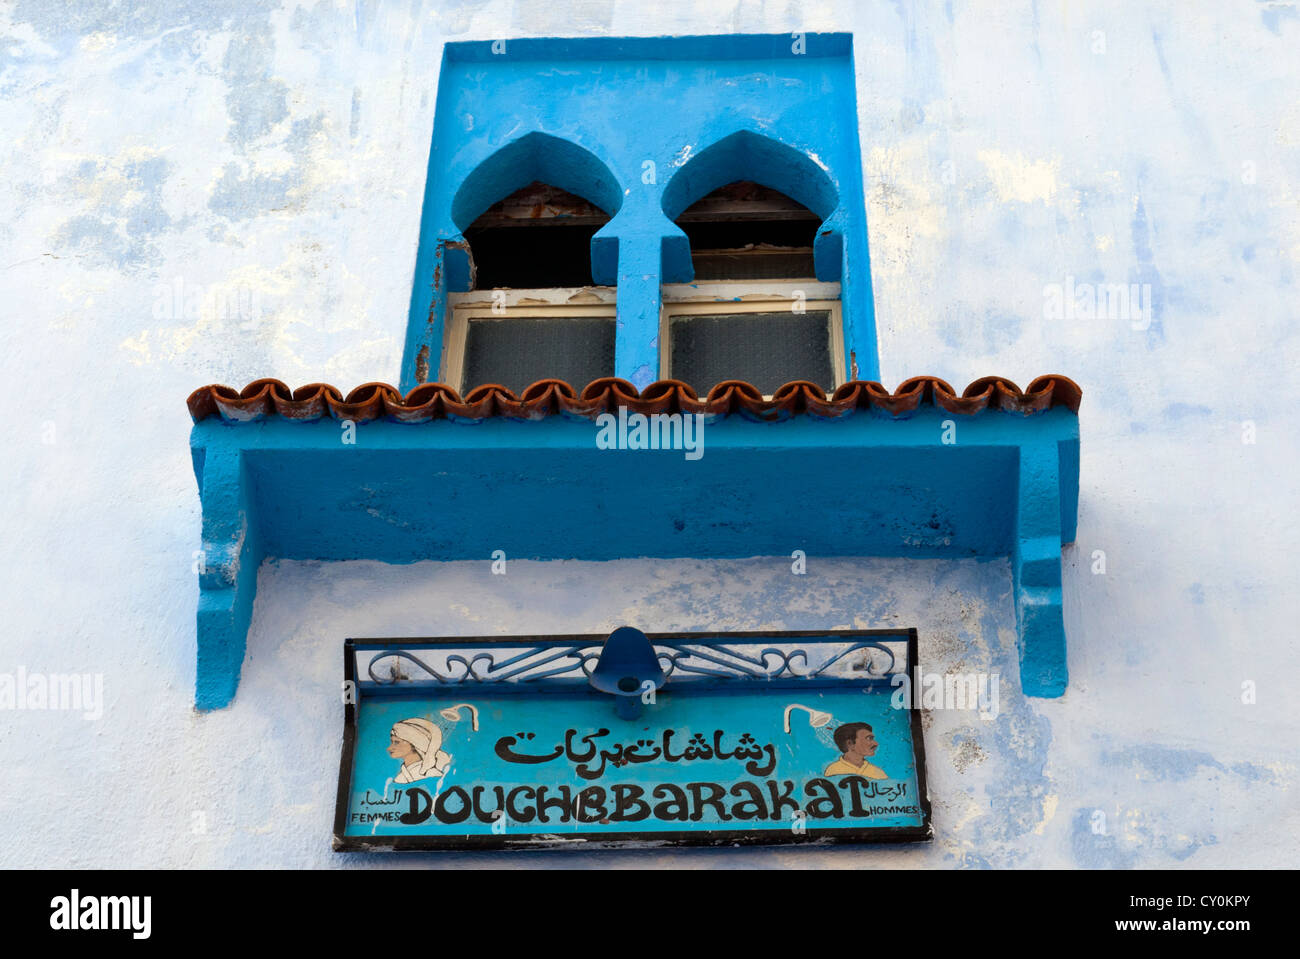 Sign of public baths and showers, Chefchaouen (Chaouen), Tangeri-Tetouan Region, Rif Mountains, Morocco, North Africa, Africa Stock Photo